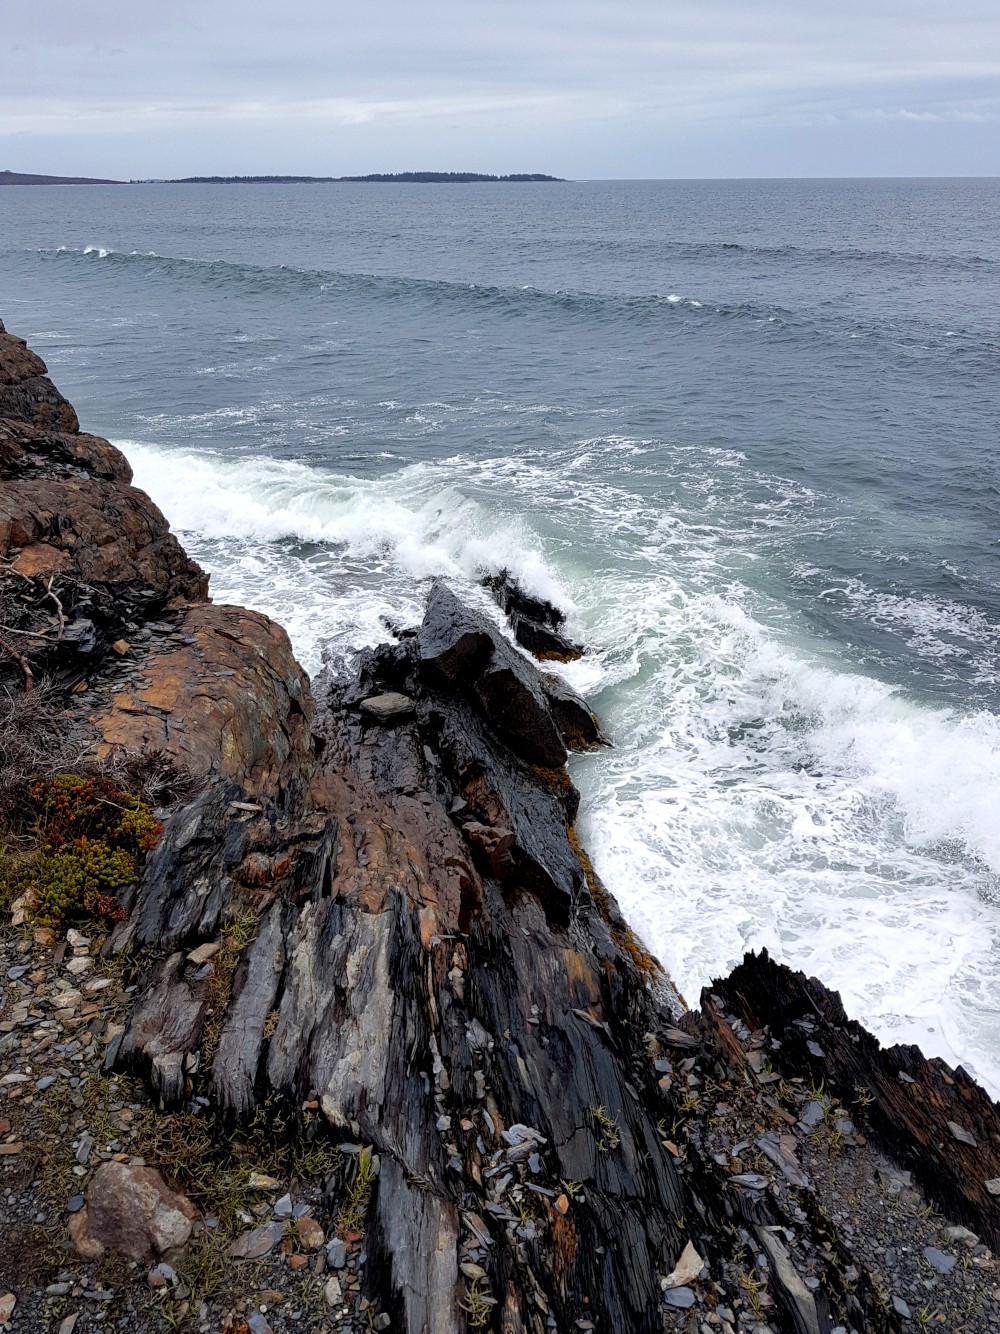 The crashing waves at Gaff Point are a big part of the hike and experience.